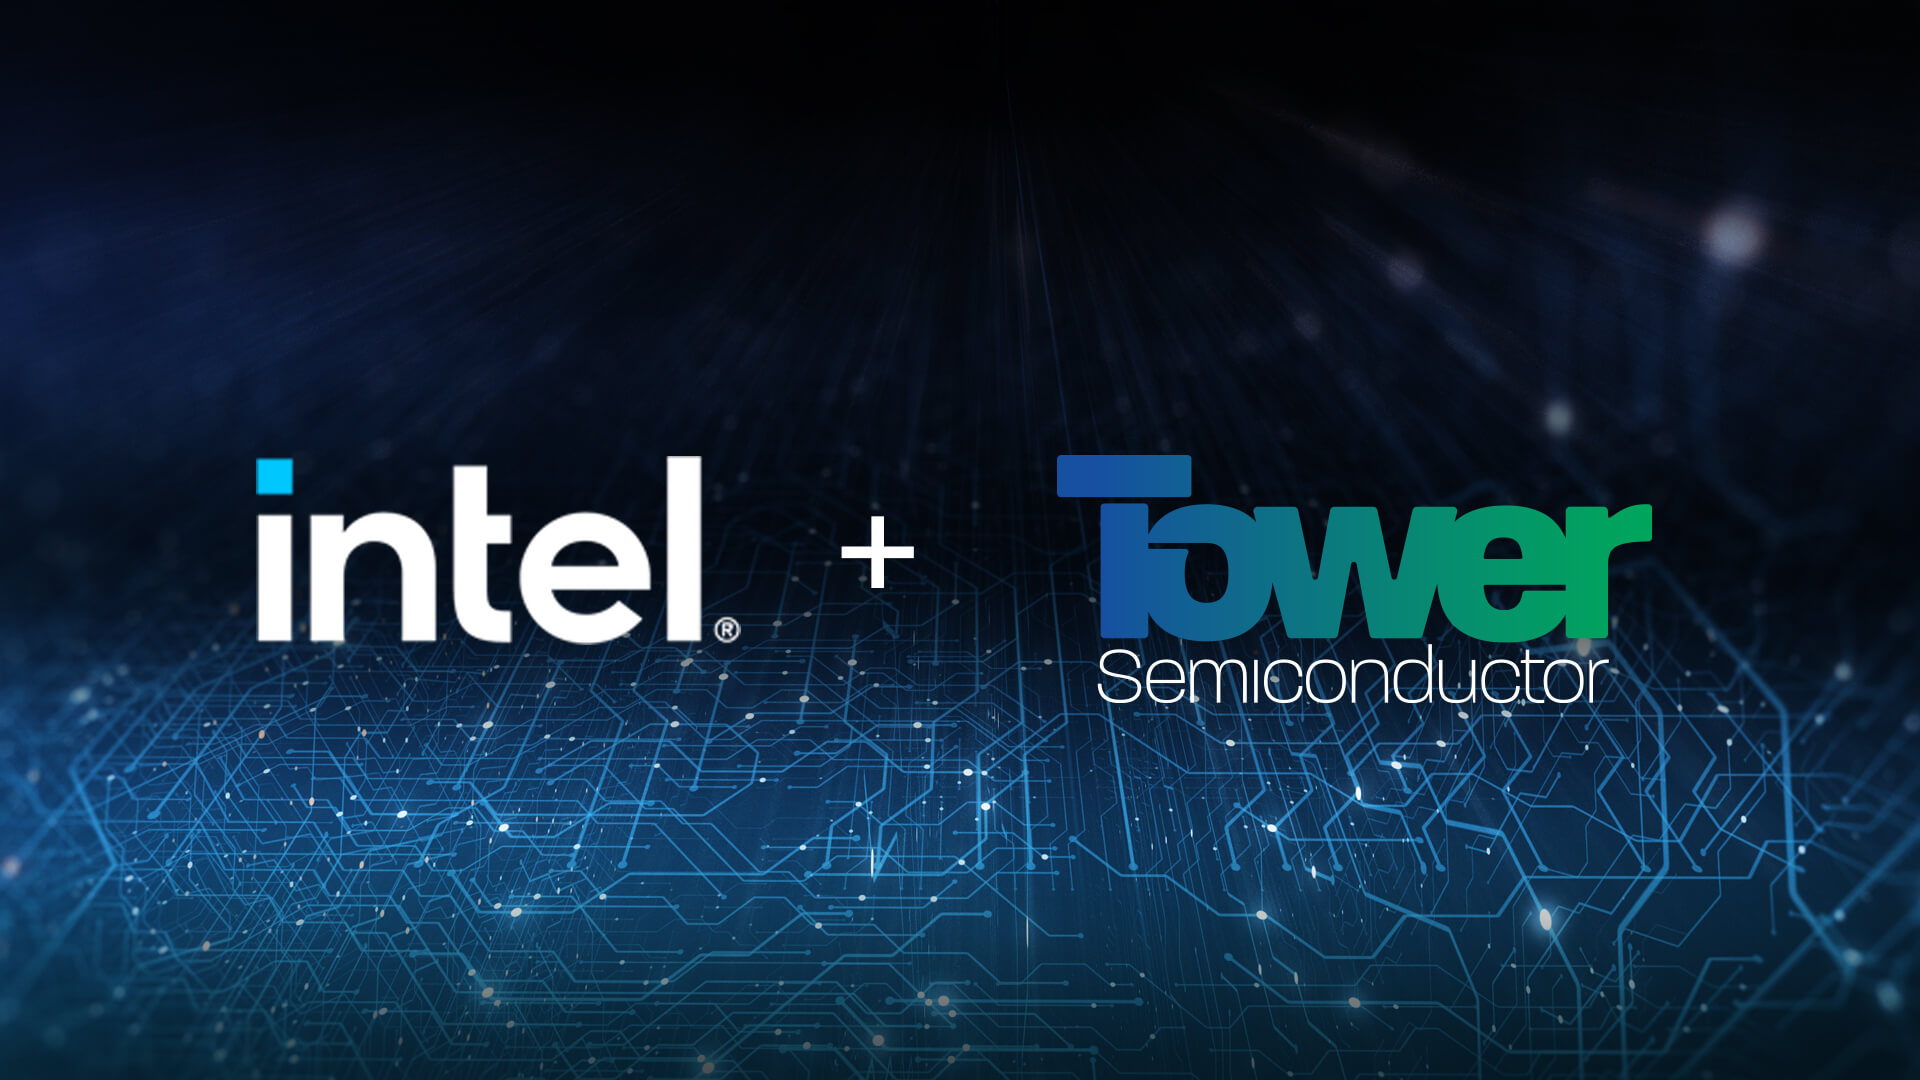 Intel to Acquire Tower Semiconductor for $5.4 Billion